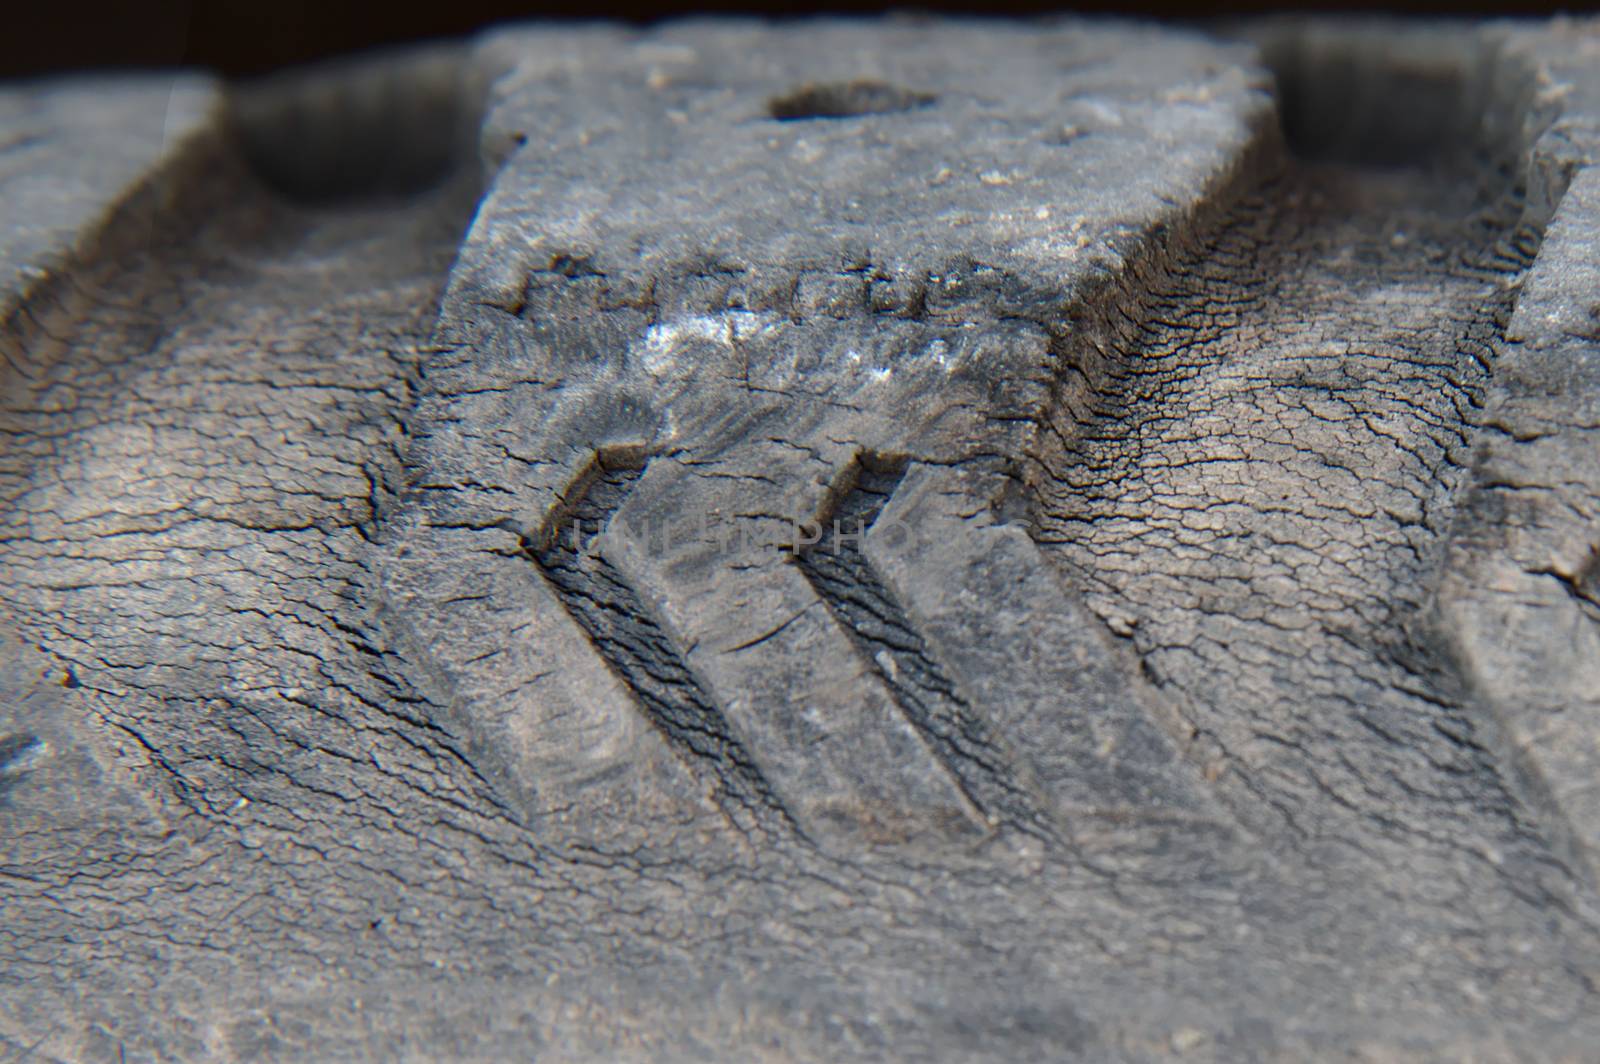 Cracked surface of an old tire of a car. Even rubber will eventually break.